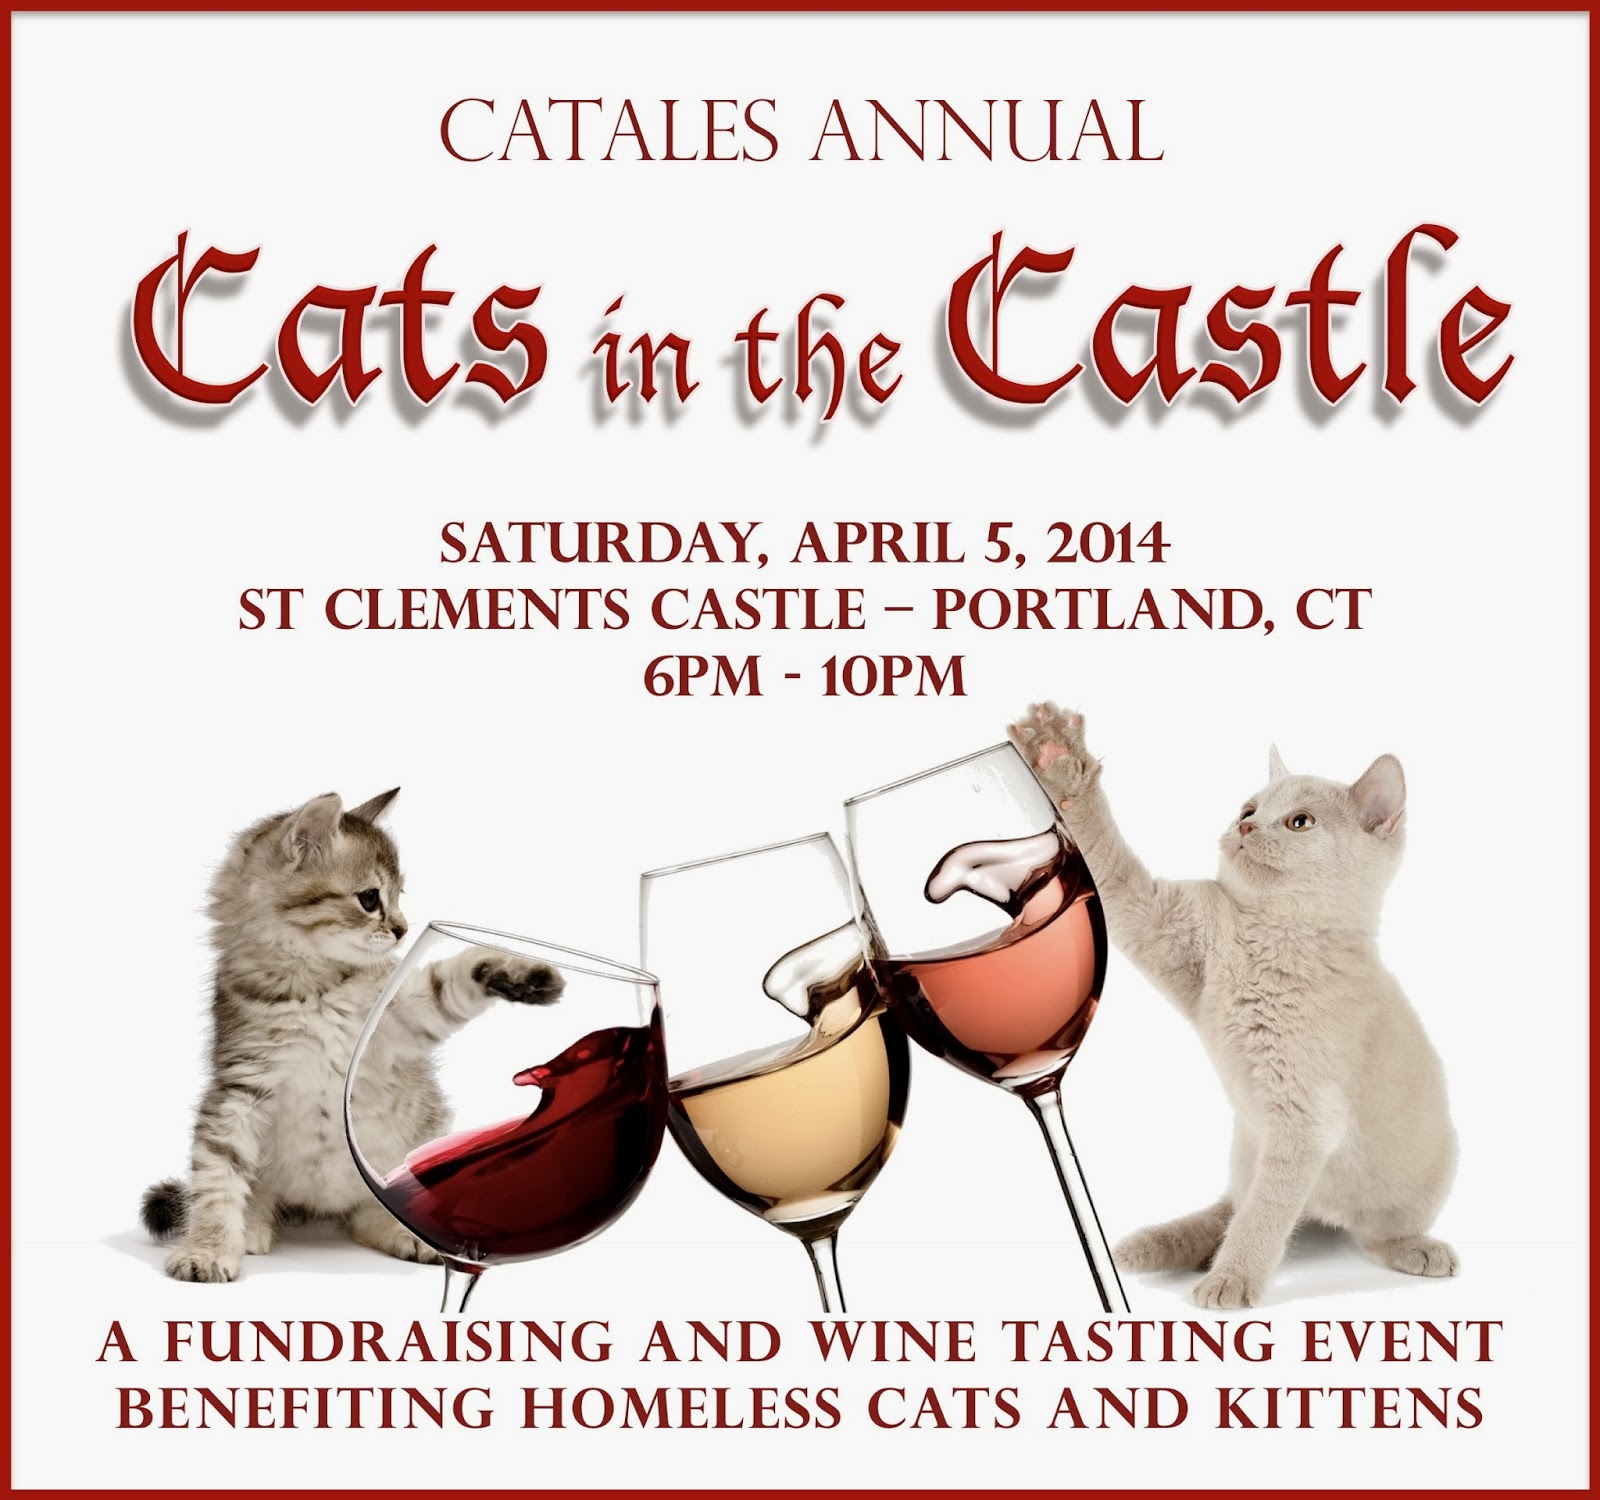 www.catales.org/catsinthecastle2014